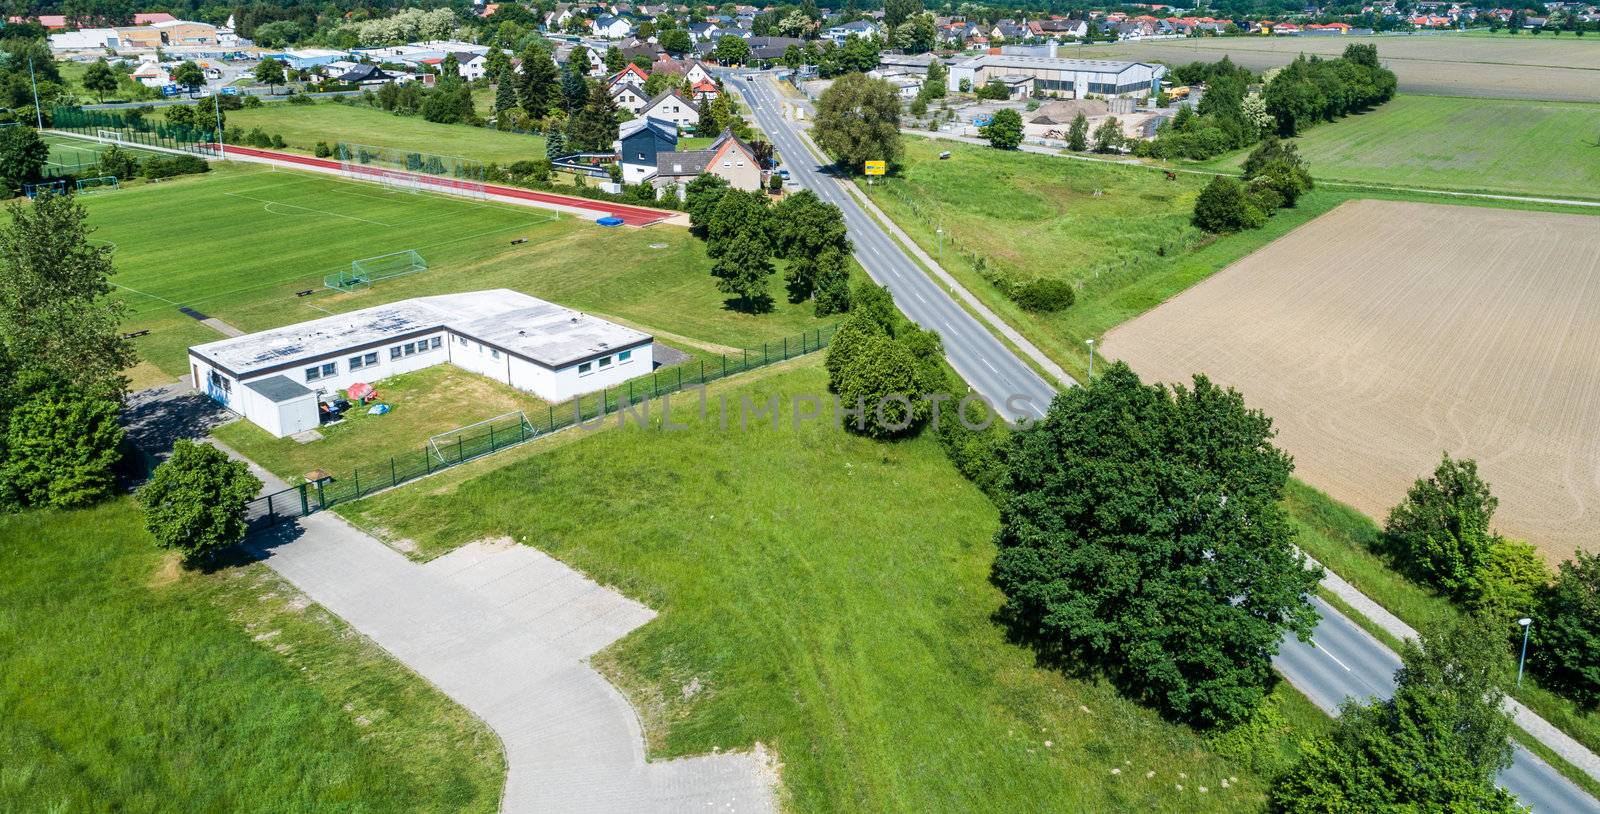 Aerial view of the clubhouse of a regional football club on the outskirts of the city next to a big street, football field in the background, near Wolfsburg